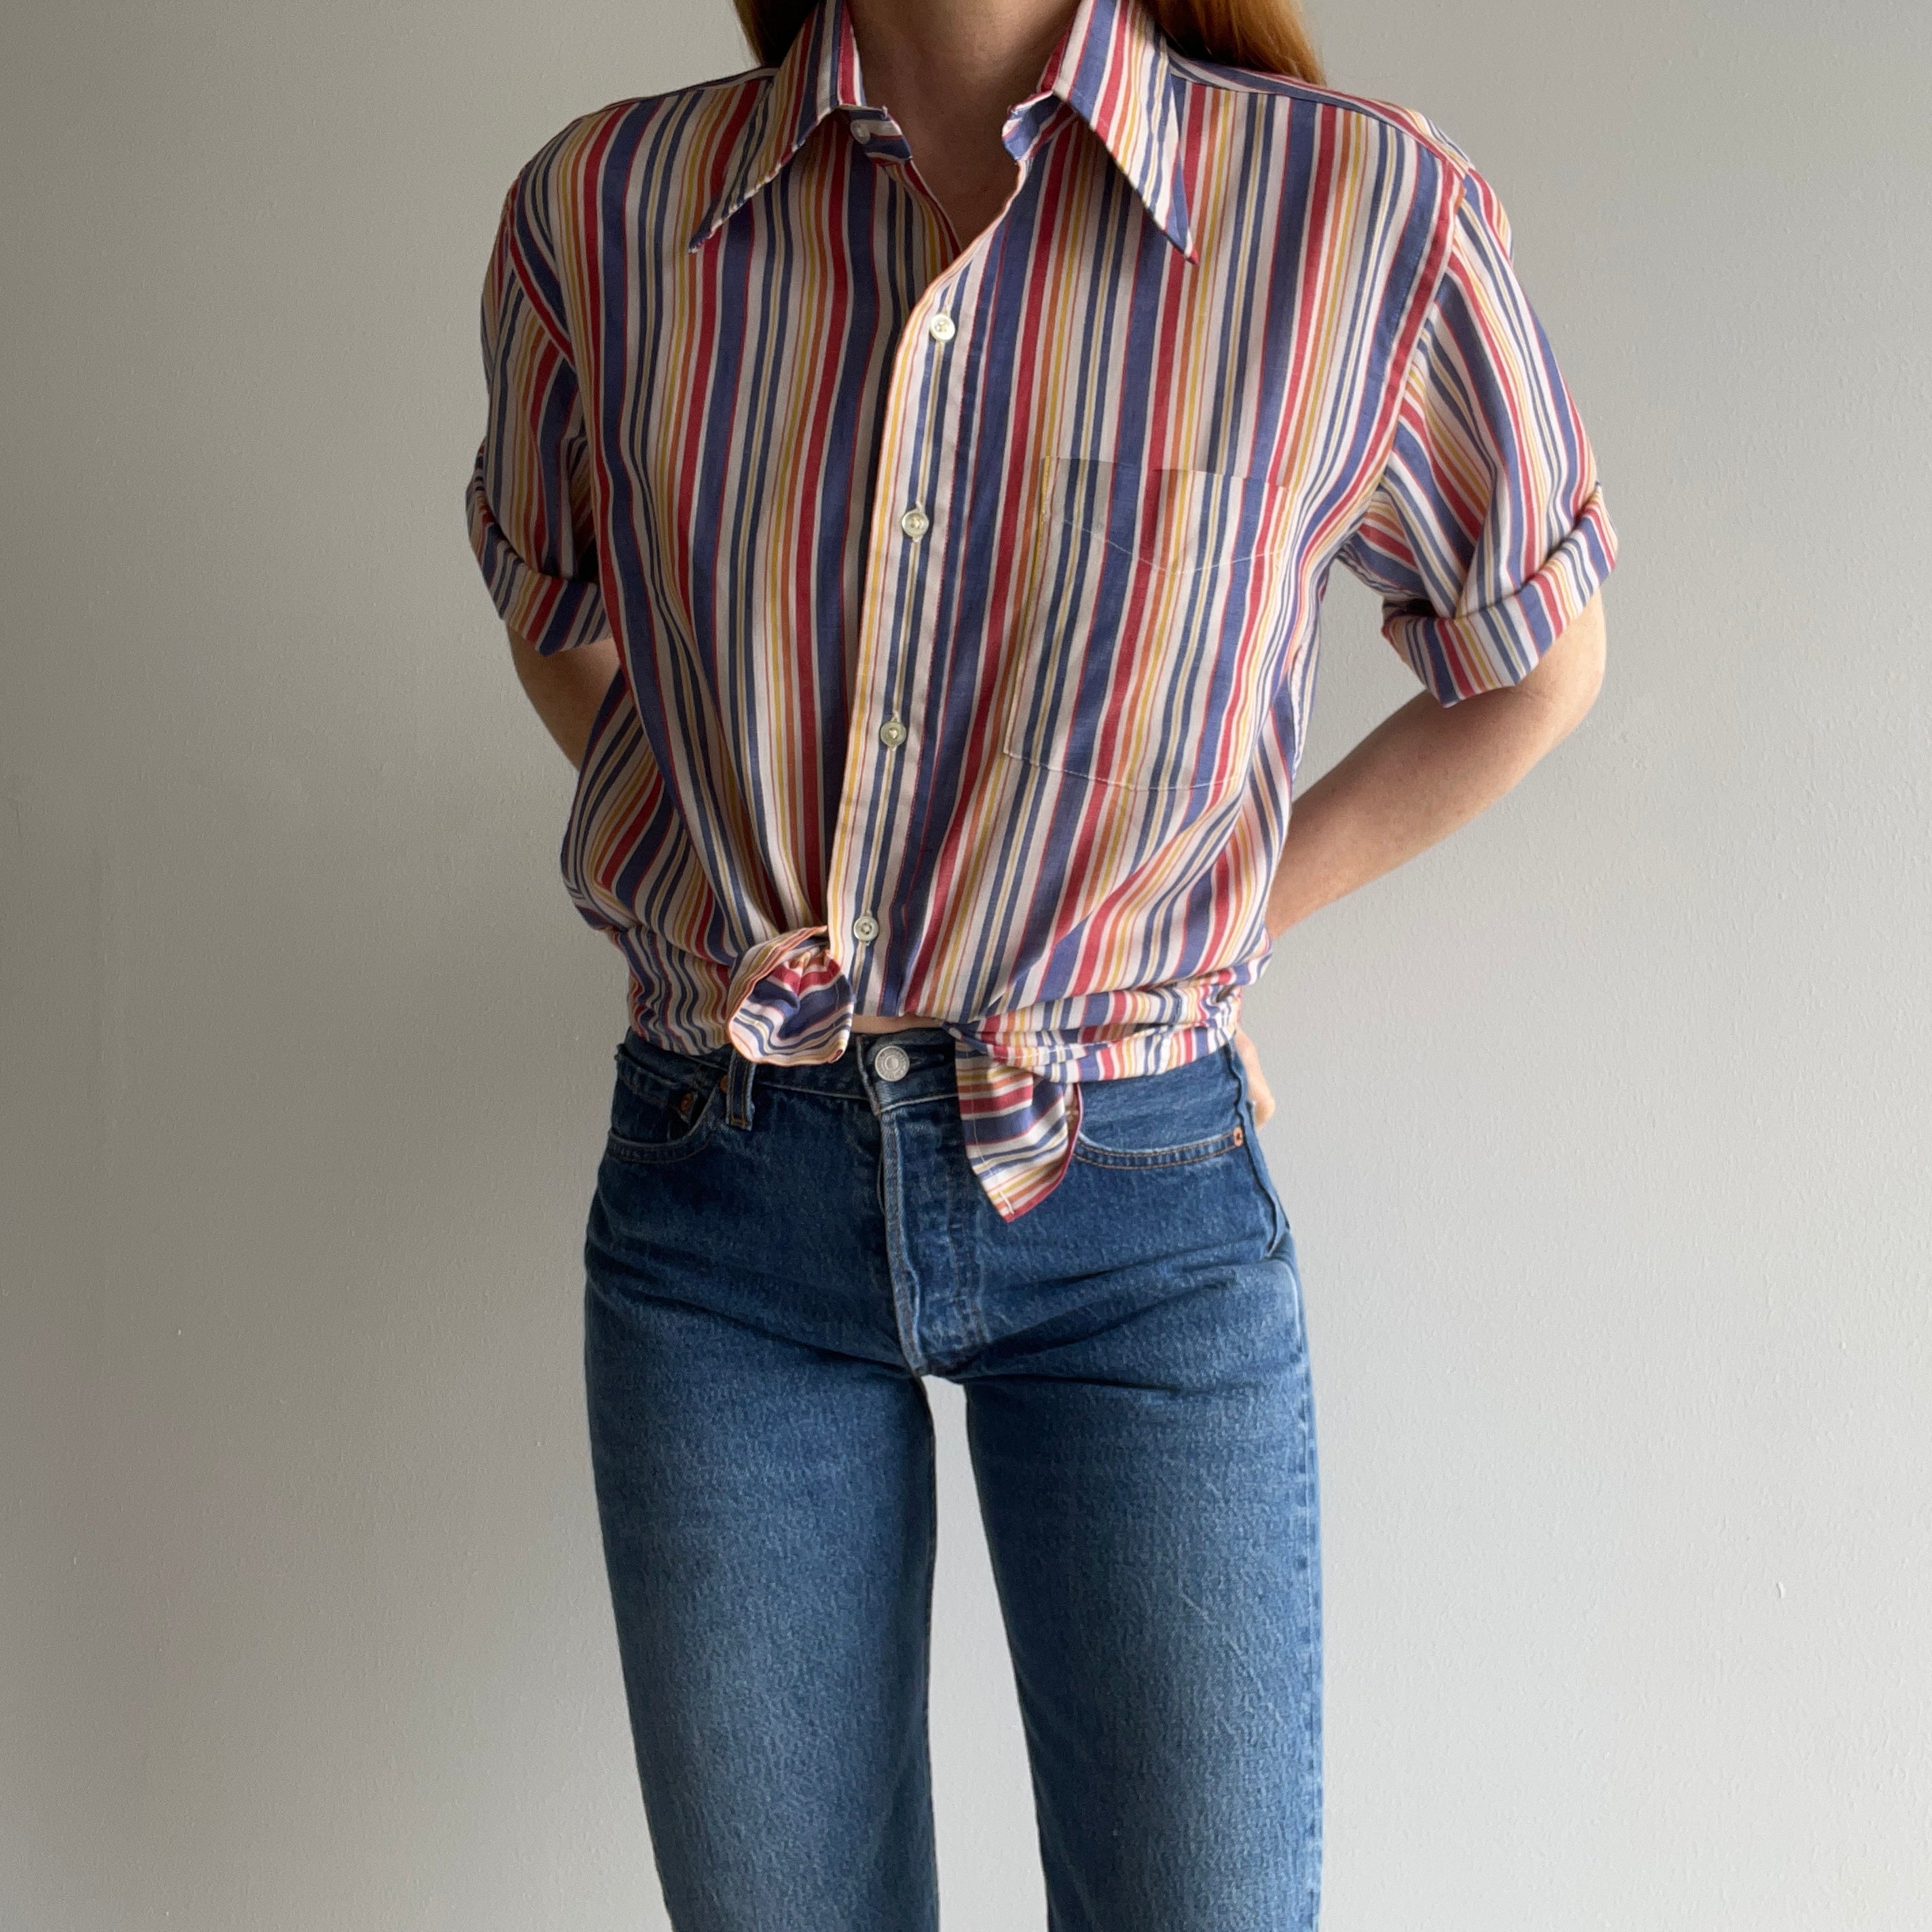 1970s Striped Short Sleeve Button Up T-Shirt - WOWOWOOW